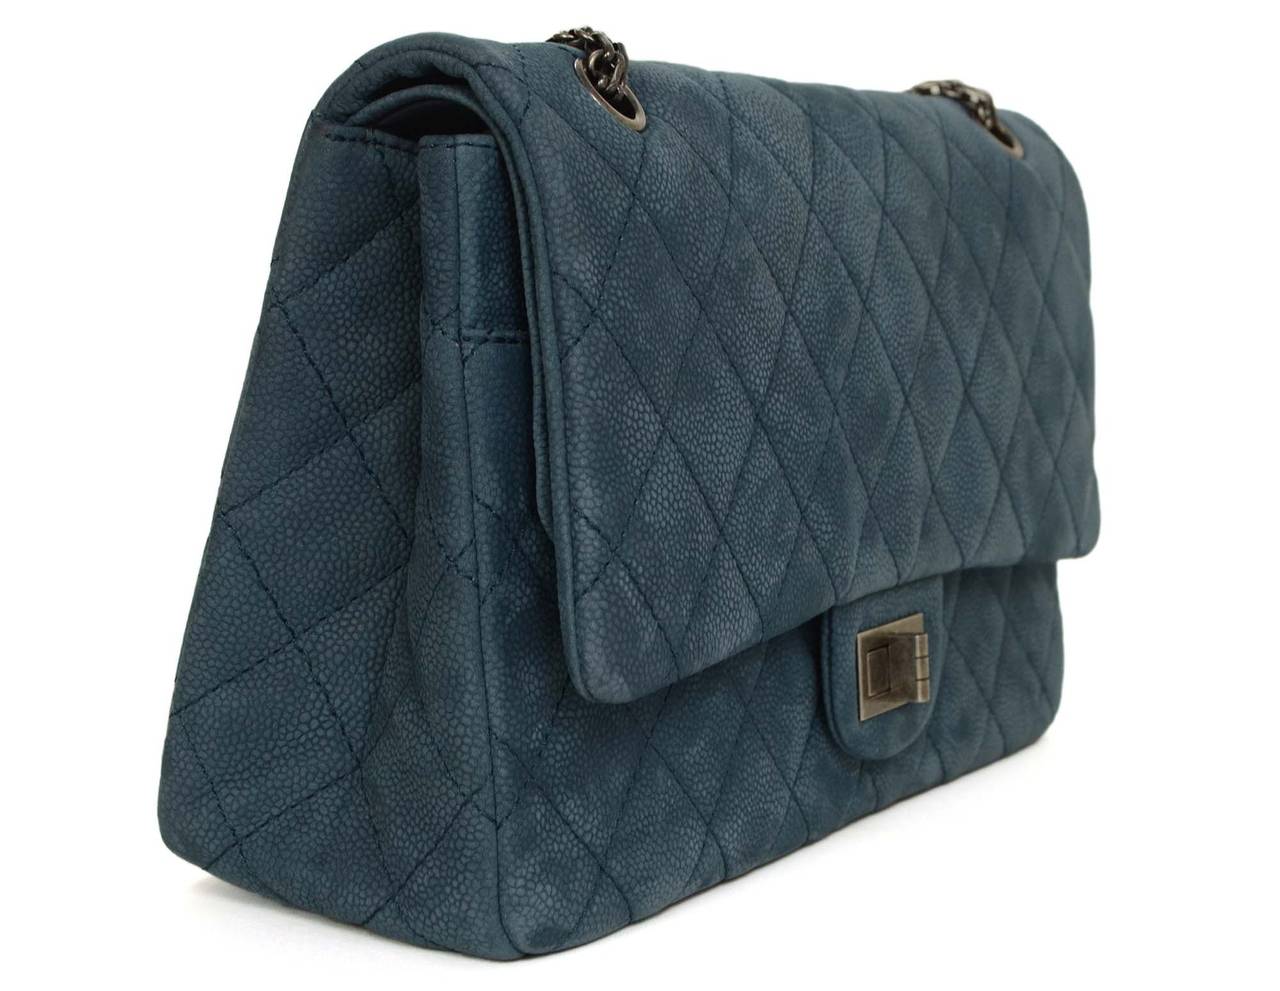 Chanel Iridescent Blue Quilted Caviar 2.55 Re-Issue 227 Double Flap Bag
Features mademoiselle chain strap and re-issue rectangular twist lock with CHANEL engraved.
Made in: France
Year of Production: 2013
Color: Blue
Hardware: Oxidized